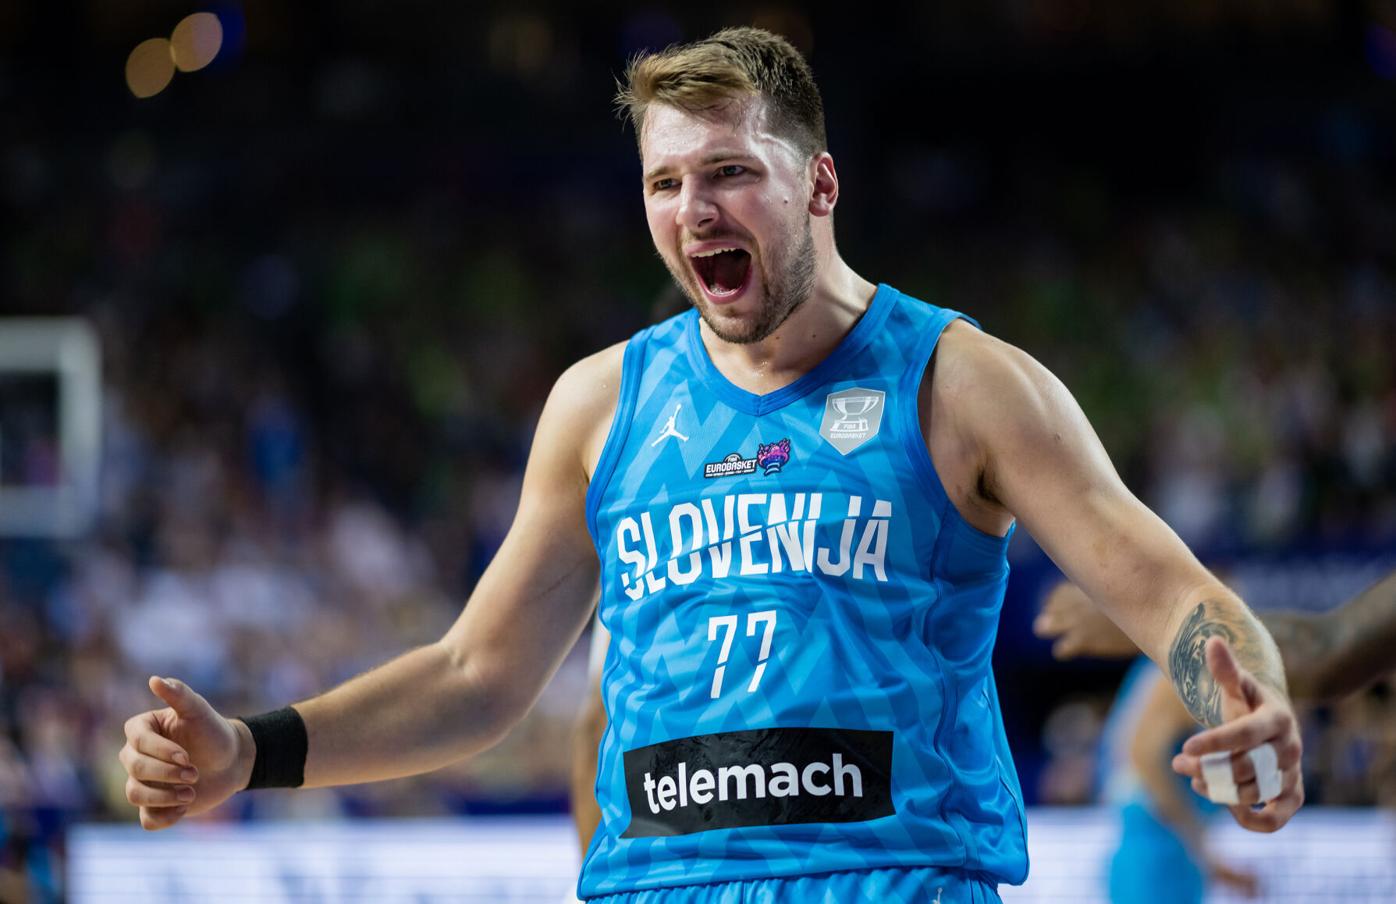 Goran Dragic's teammate, 18-year-old Luka Doncic, could be No. 1